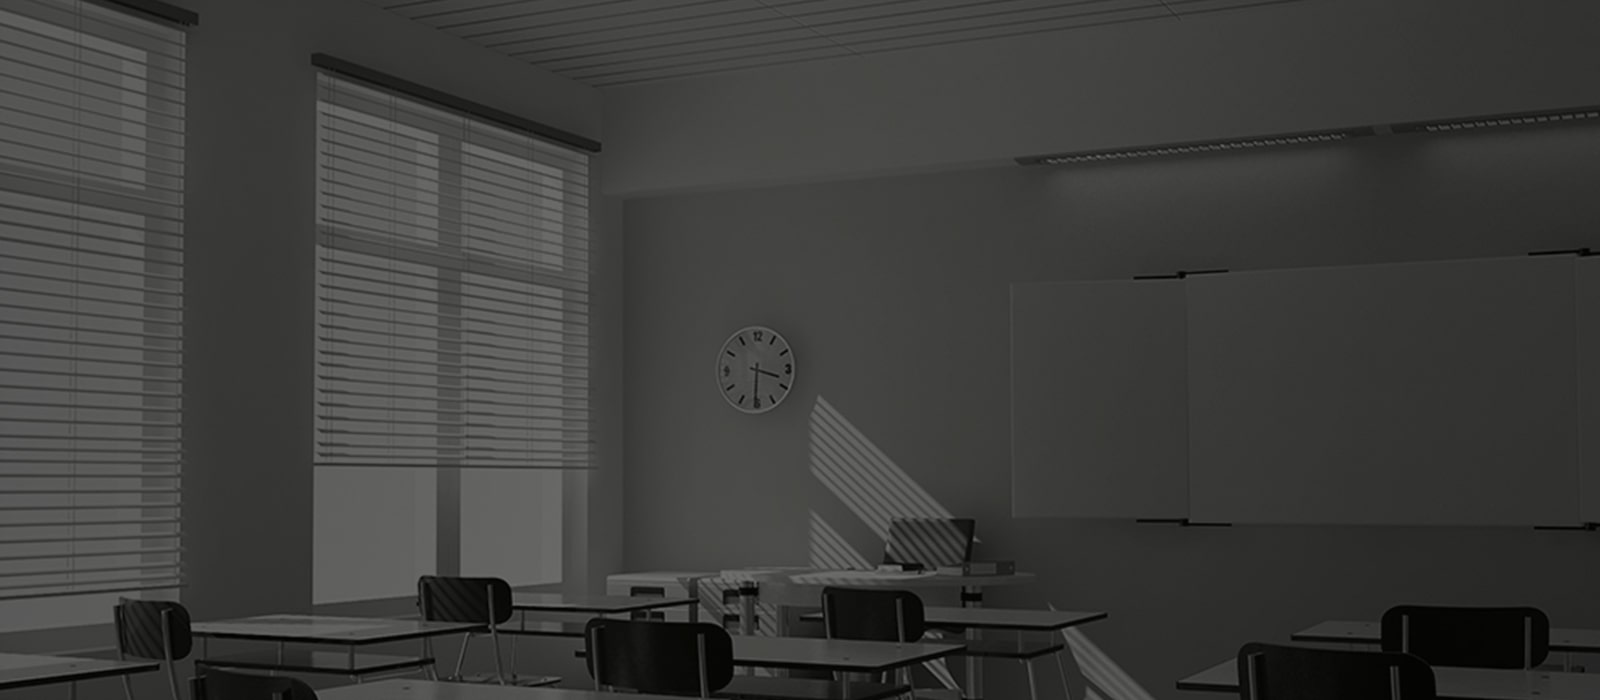 Image of an empty classroom.